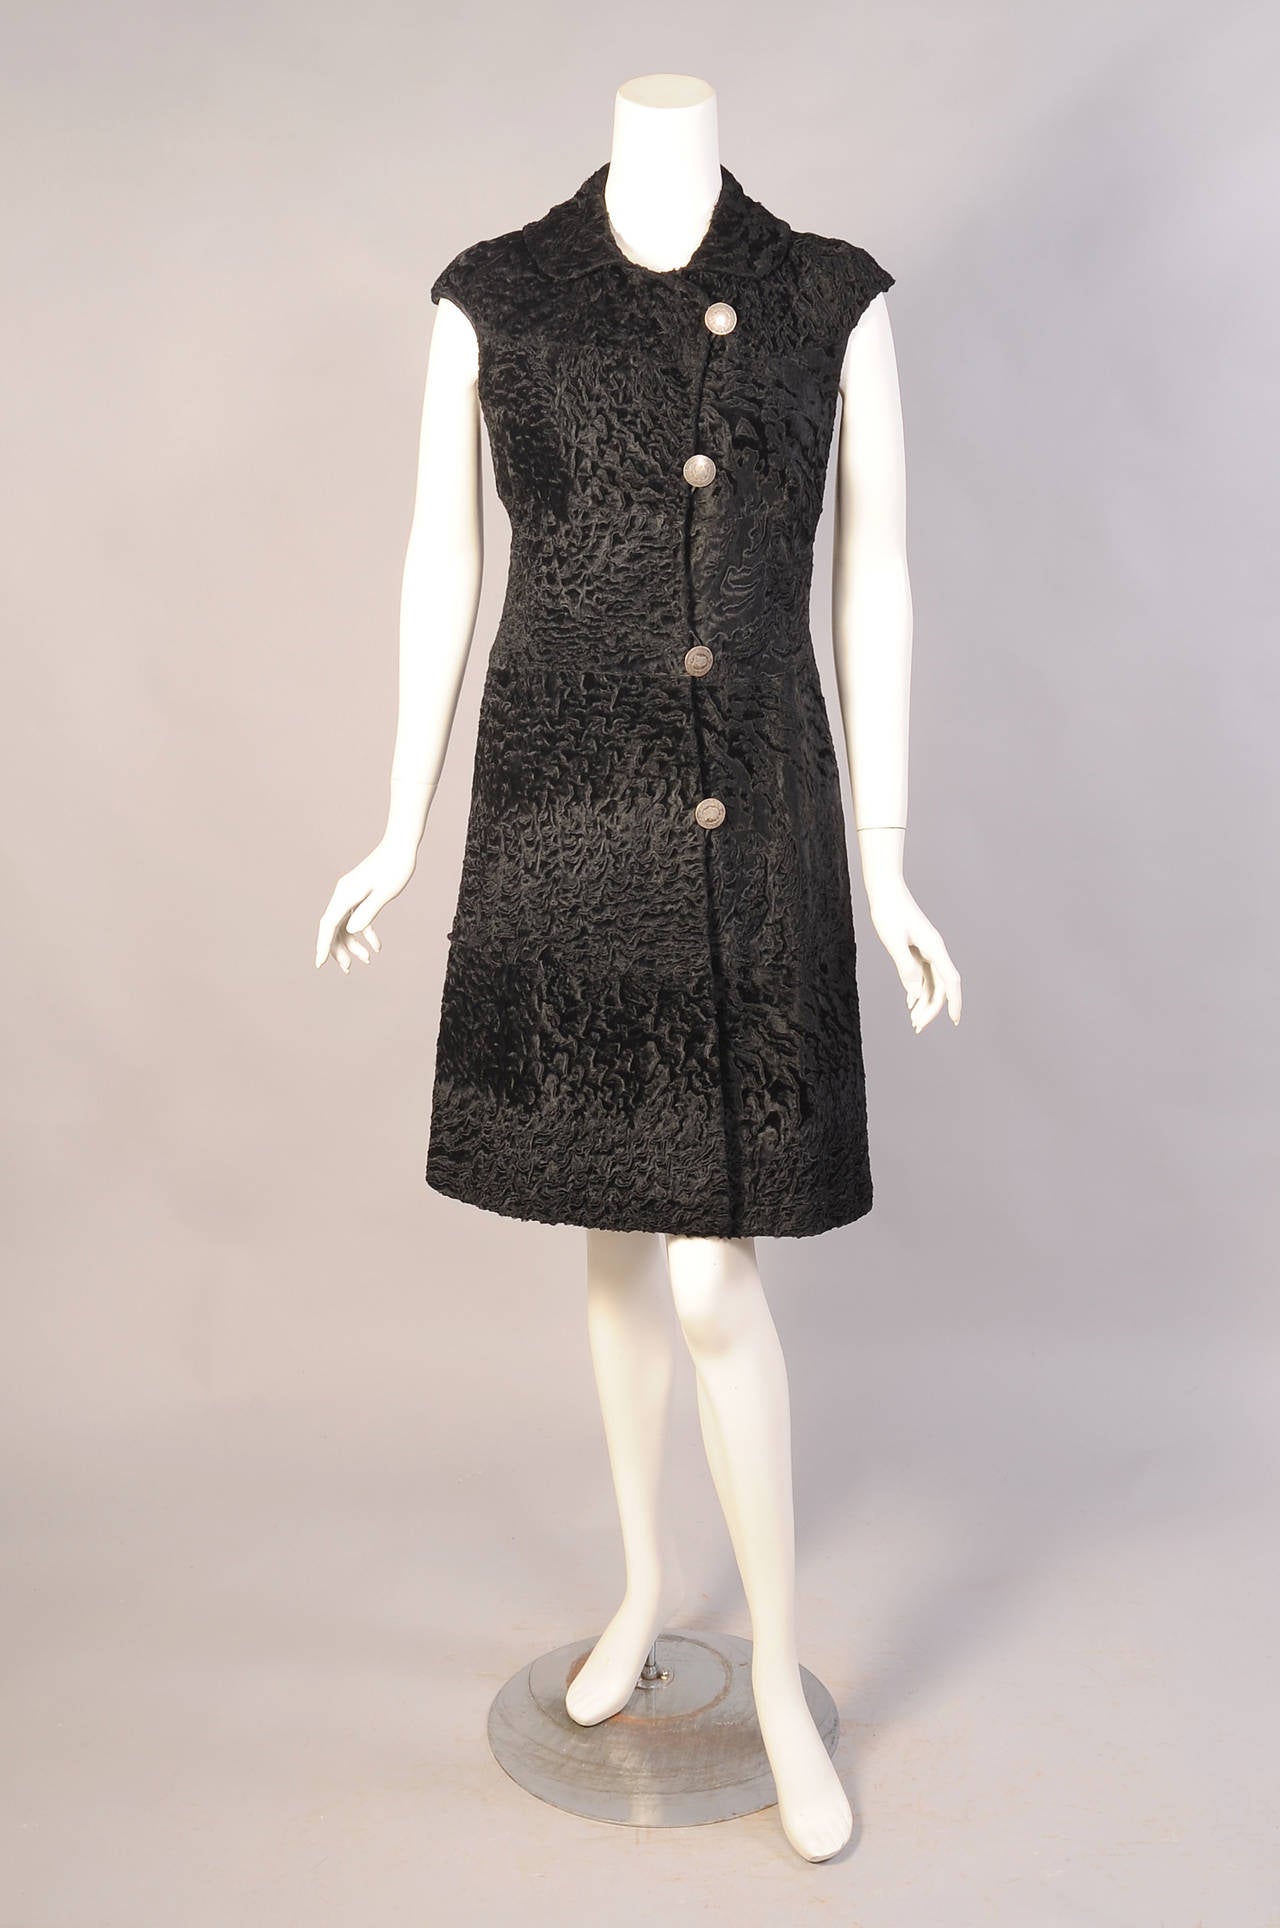 This sleek black Russian broadtail coat or dress is made from wide bands of fur. It has cap sleeves and a rounded collar. It closes left of center with large coin buttons. Retailed by lord & Taylor it is fully lined in black silk and it is in